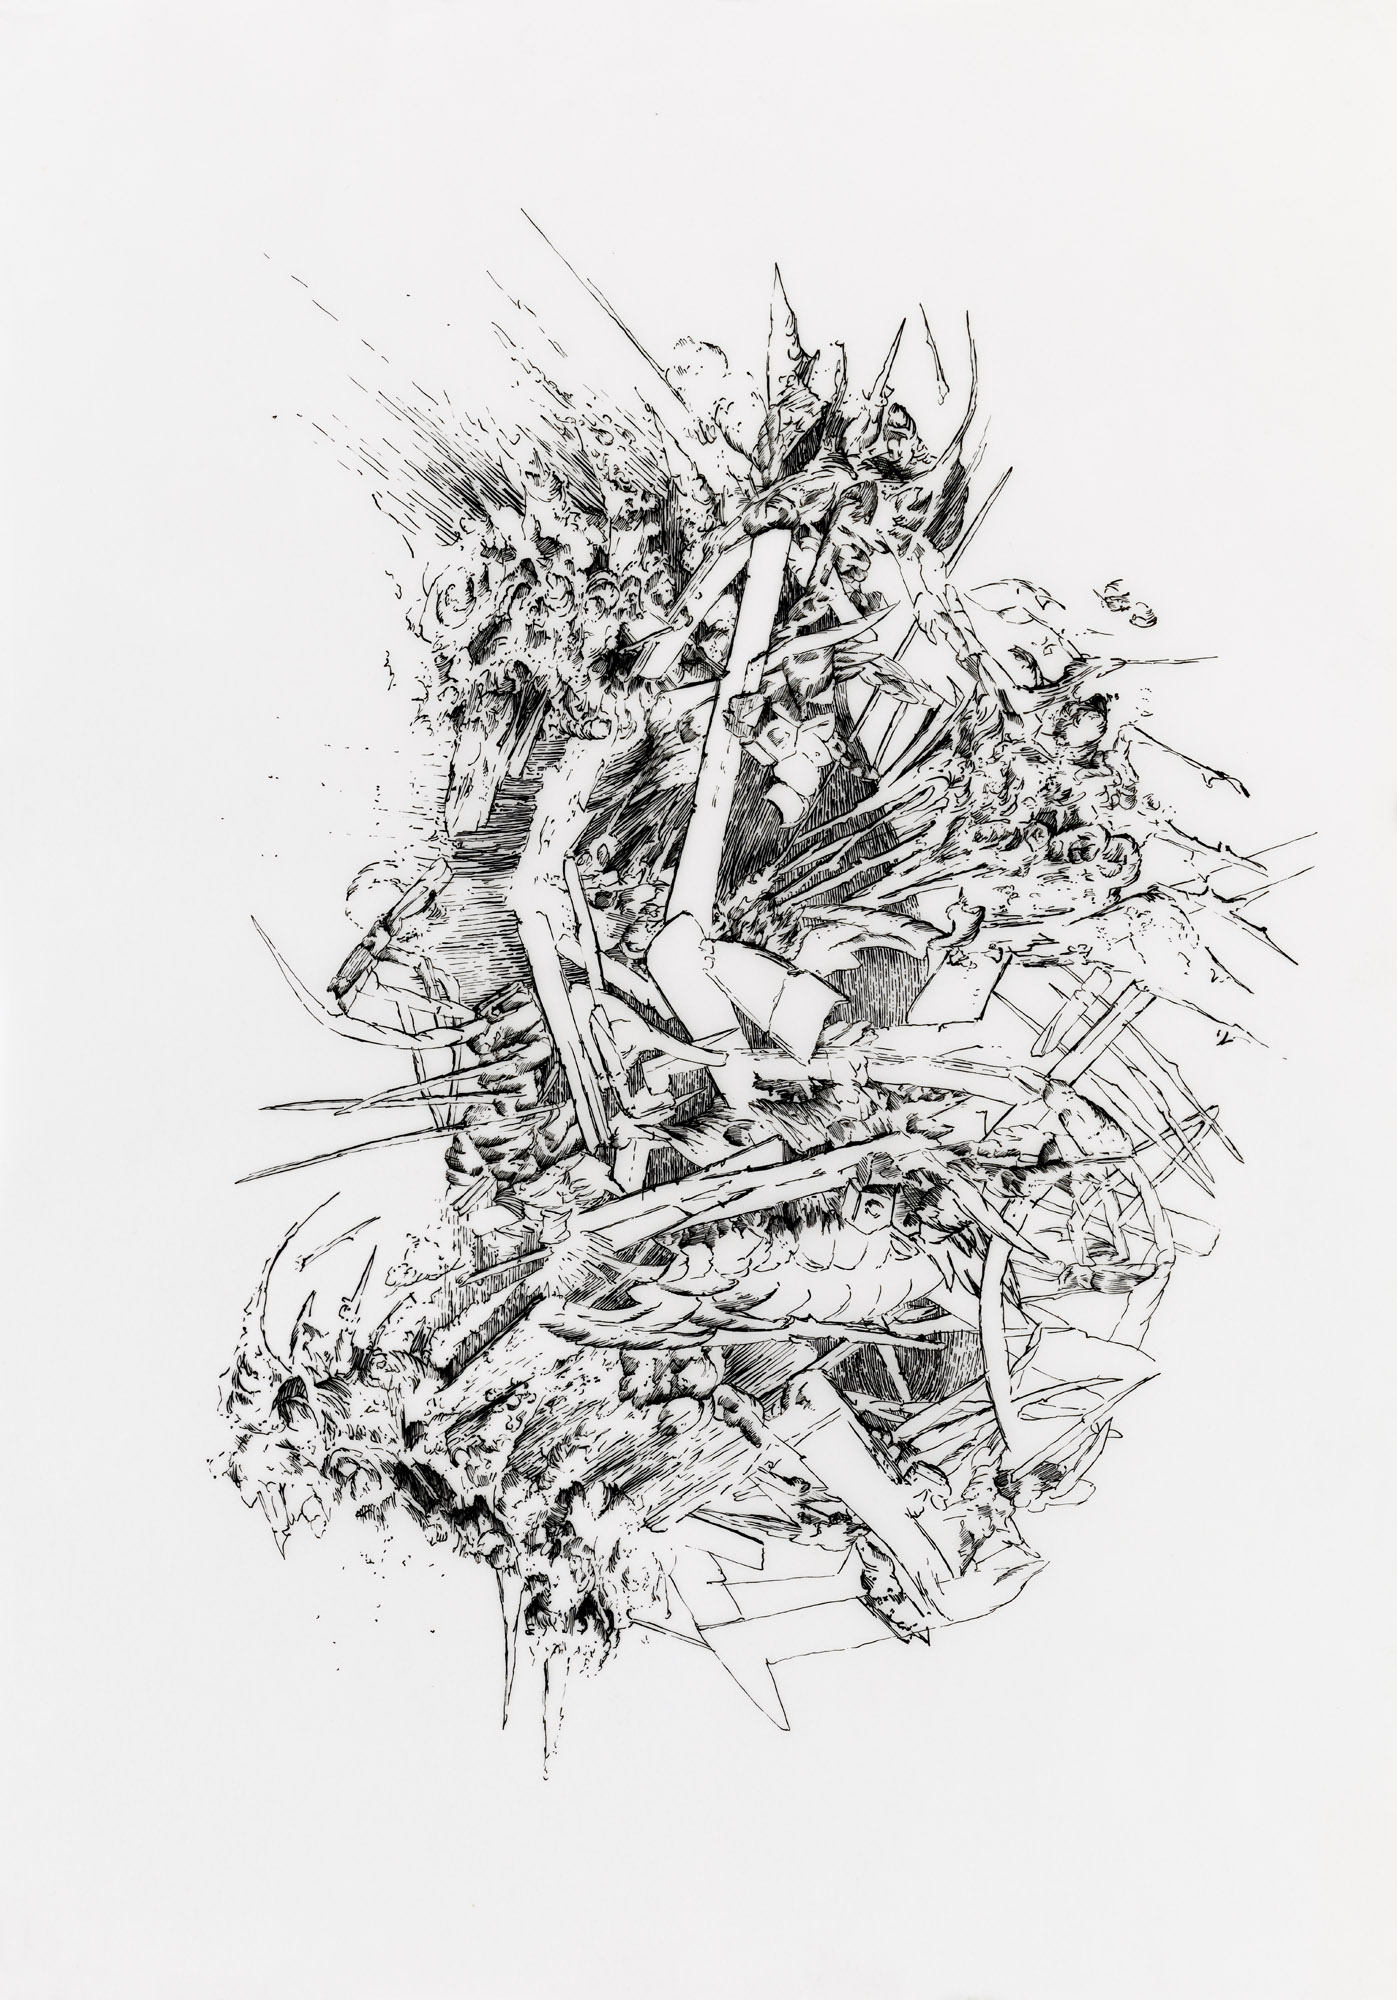 BK P106.001 | untitled | ink on transparent paper | 42x29,5cm | 2012 | privat collection berlin